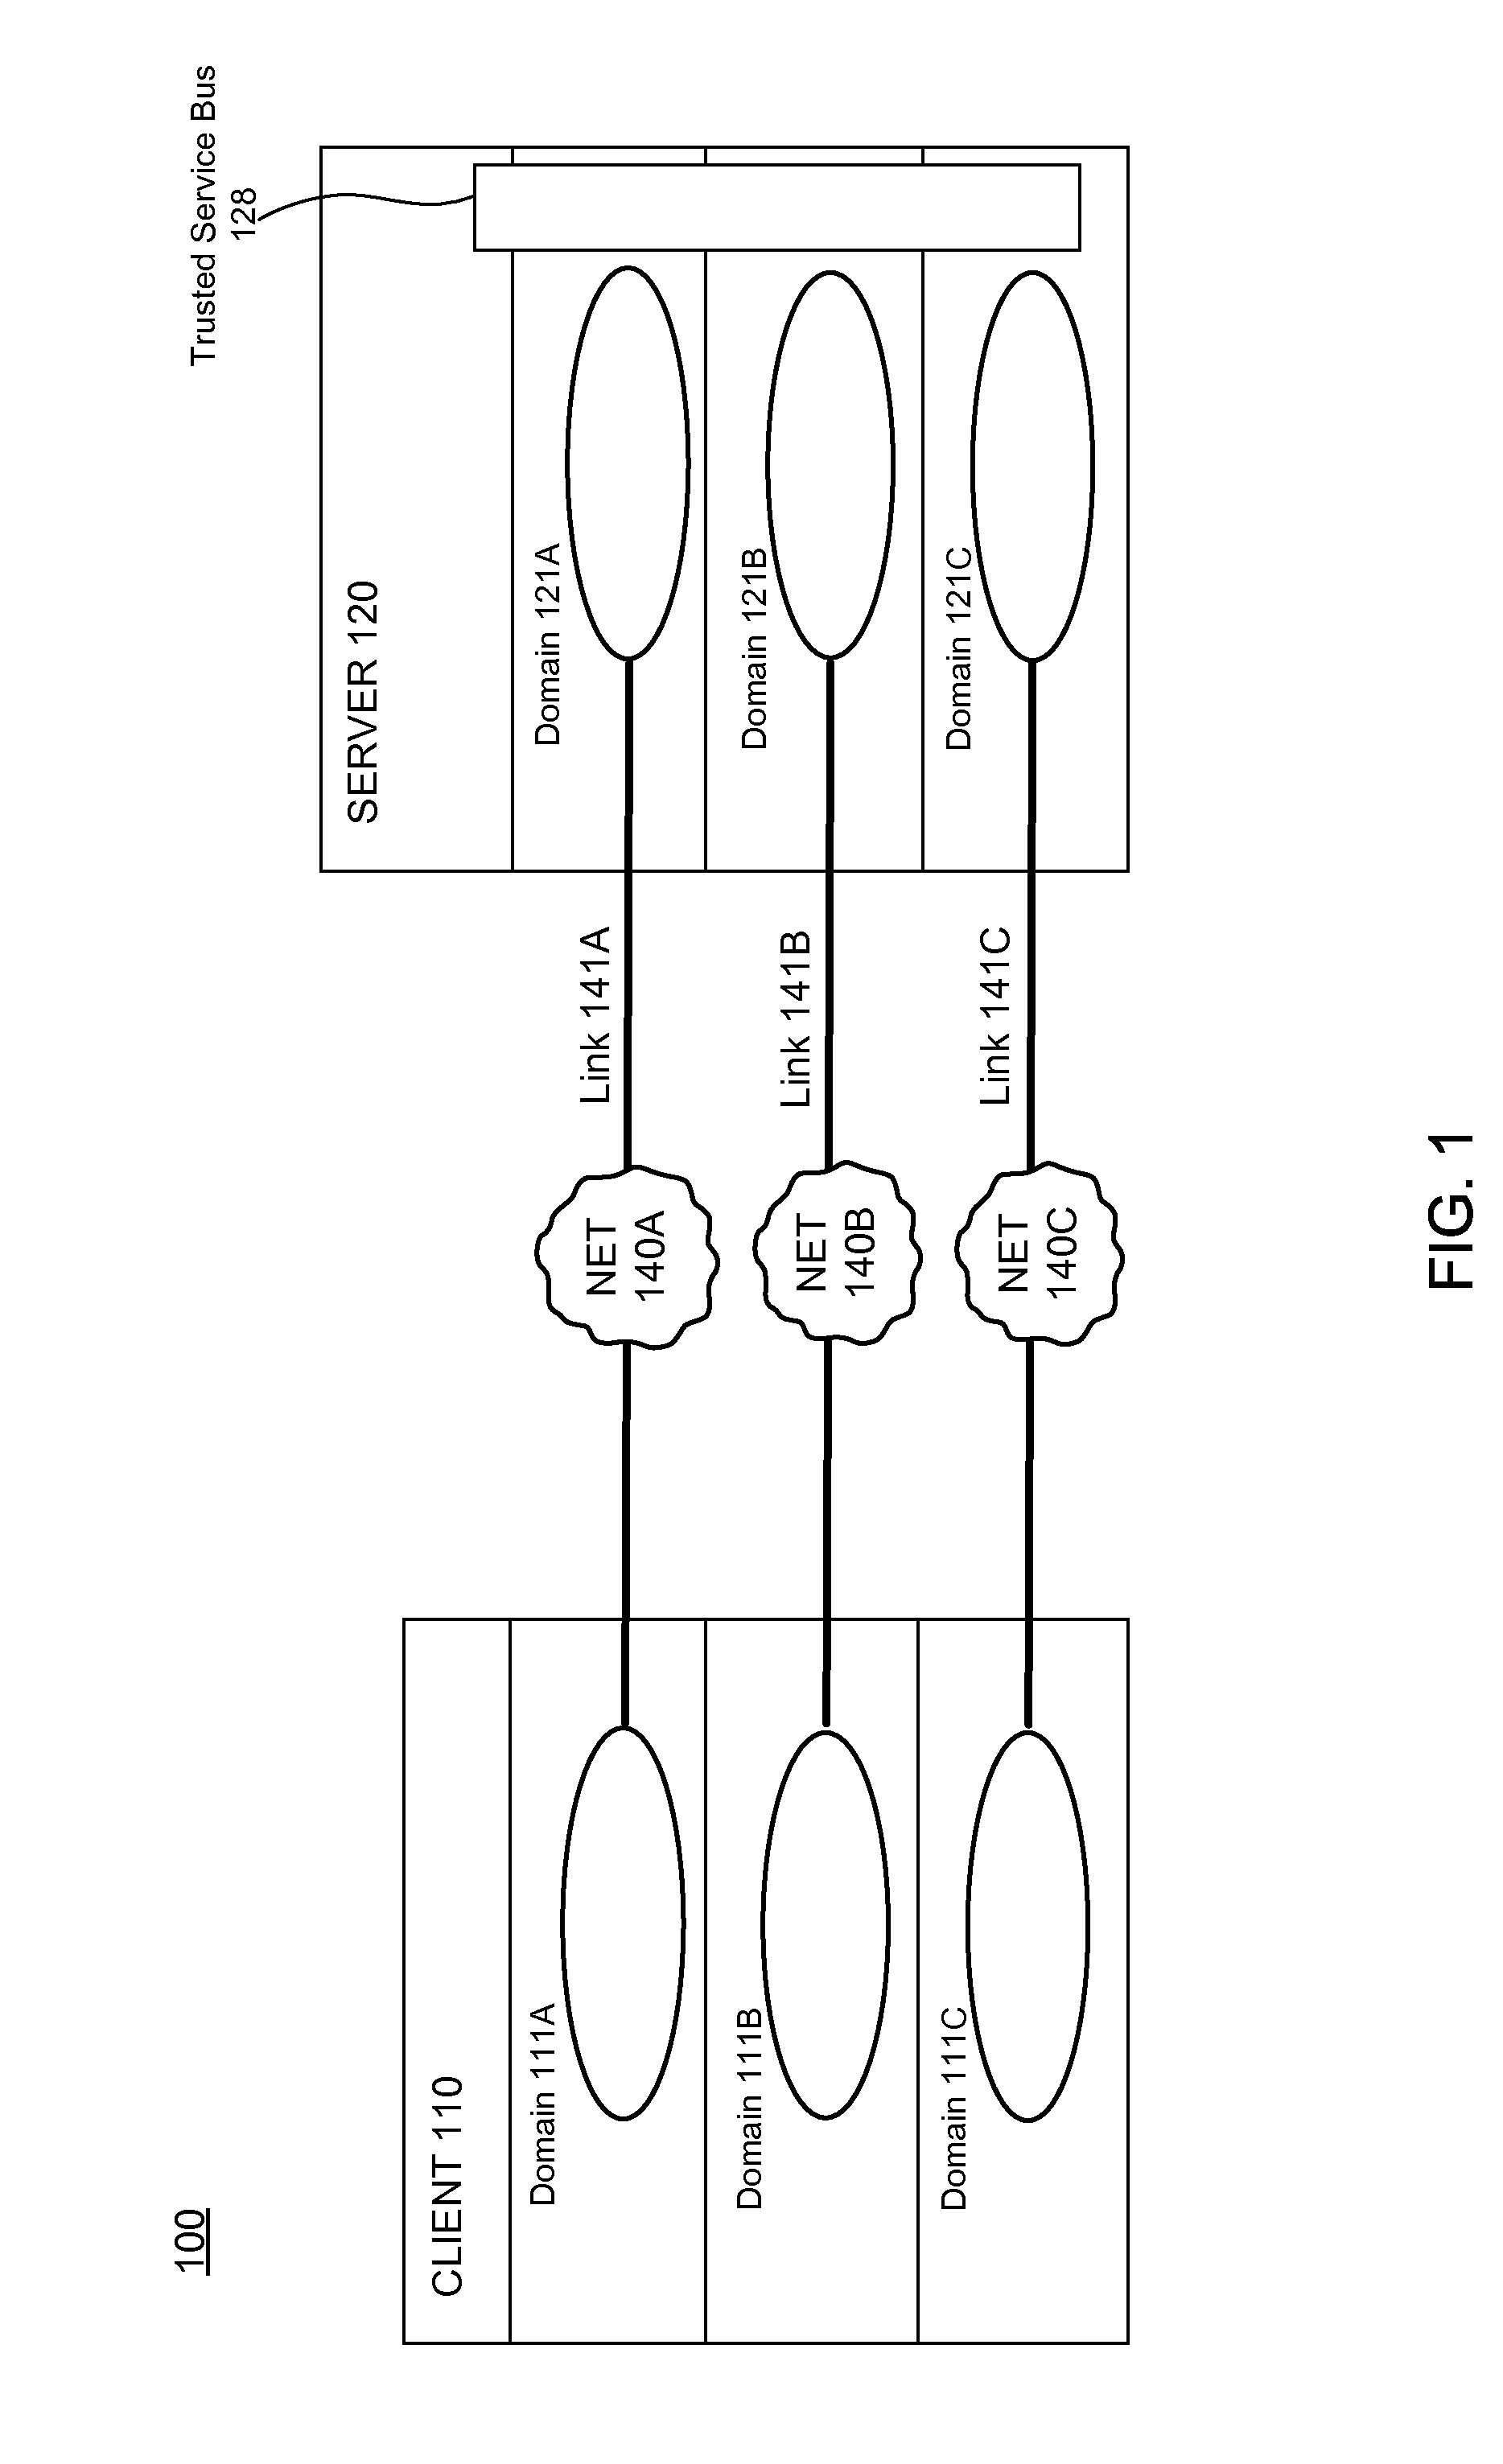 Server-based architecture for securely providing multi-domain applications